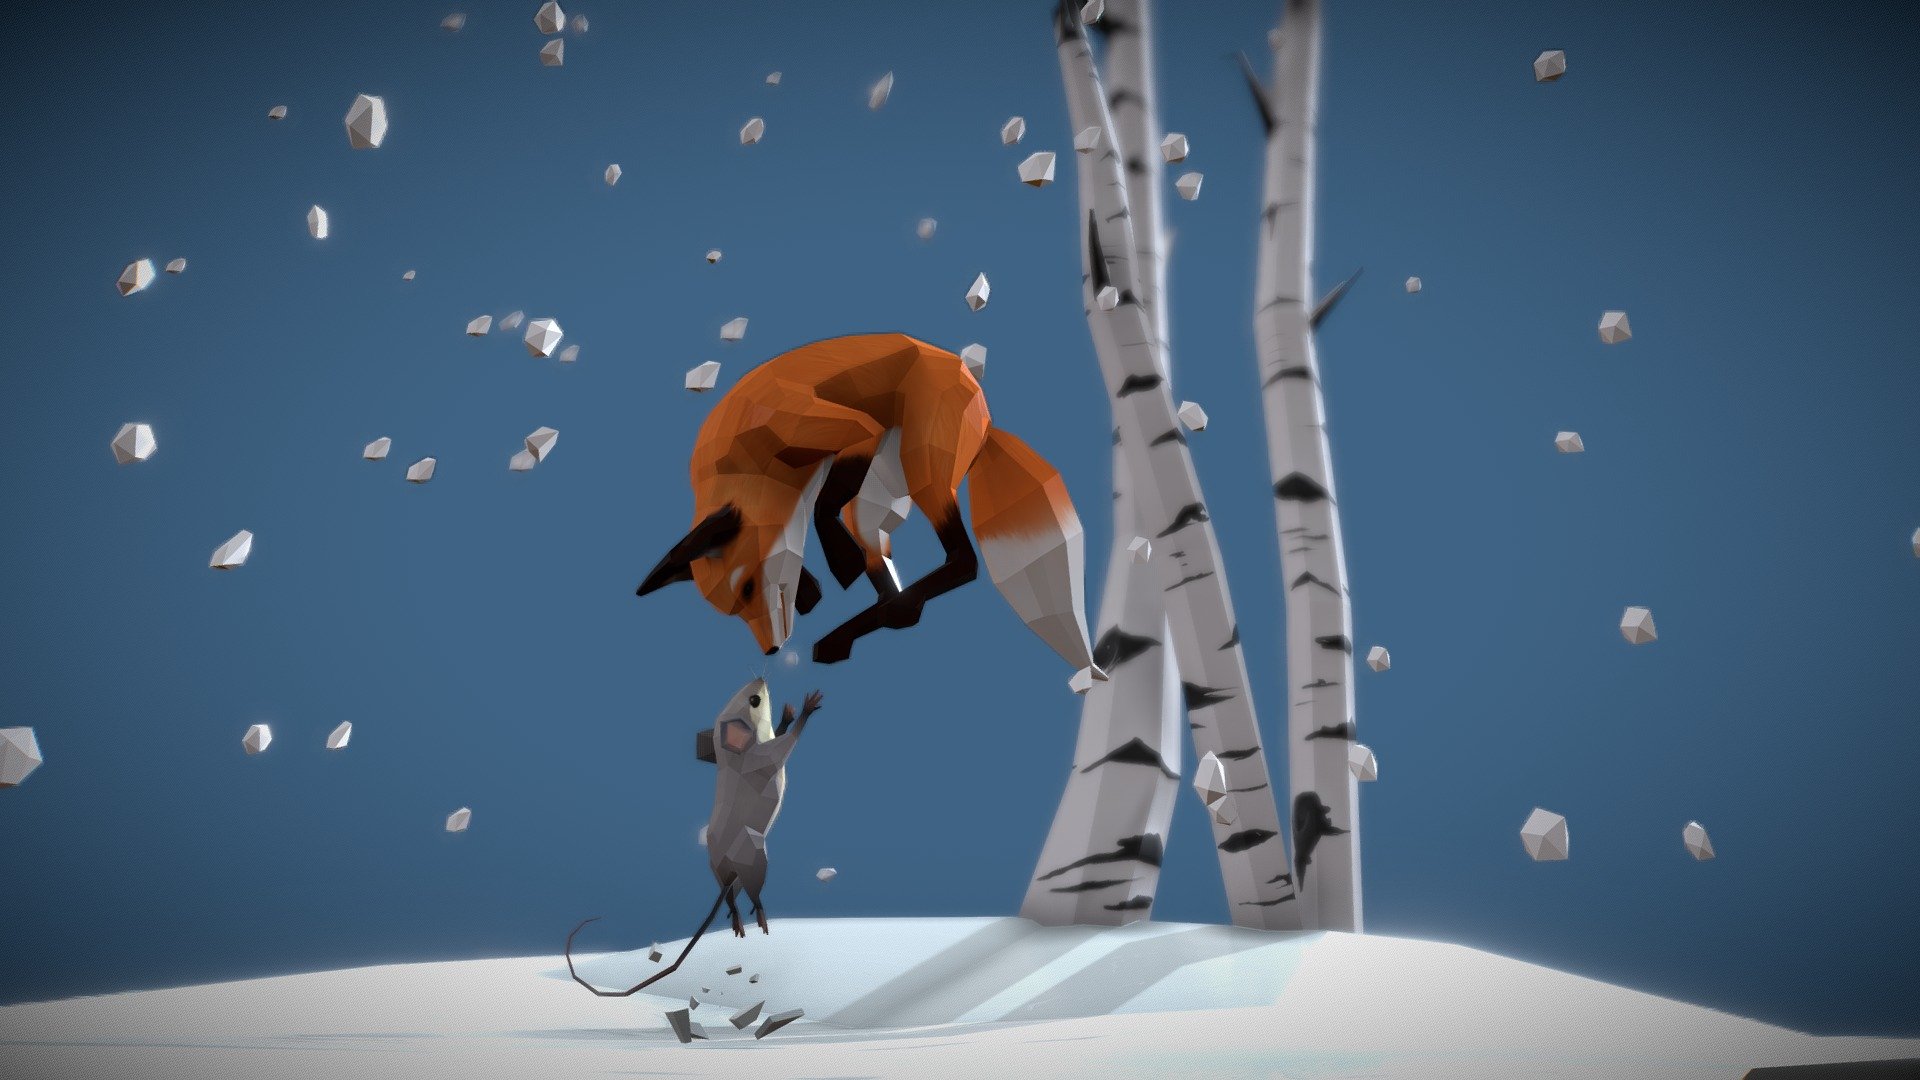 Fox and mouse playing in the air